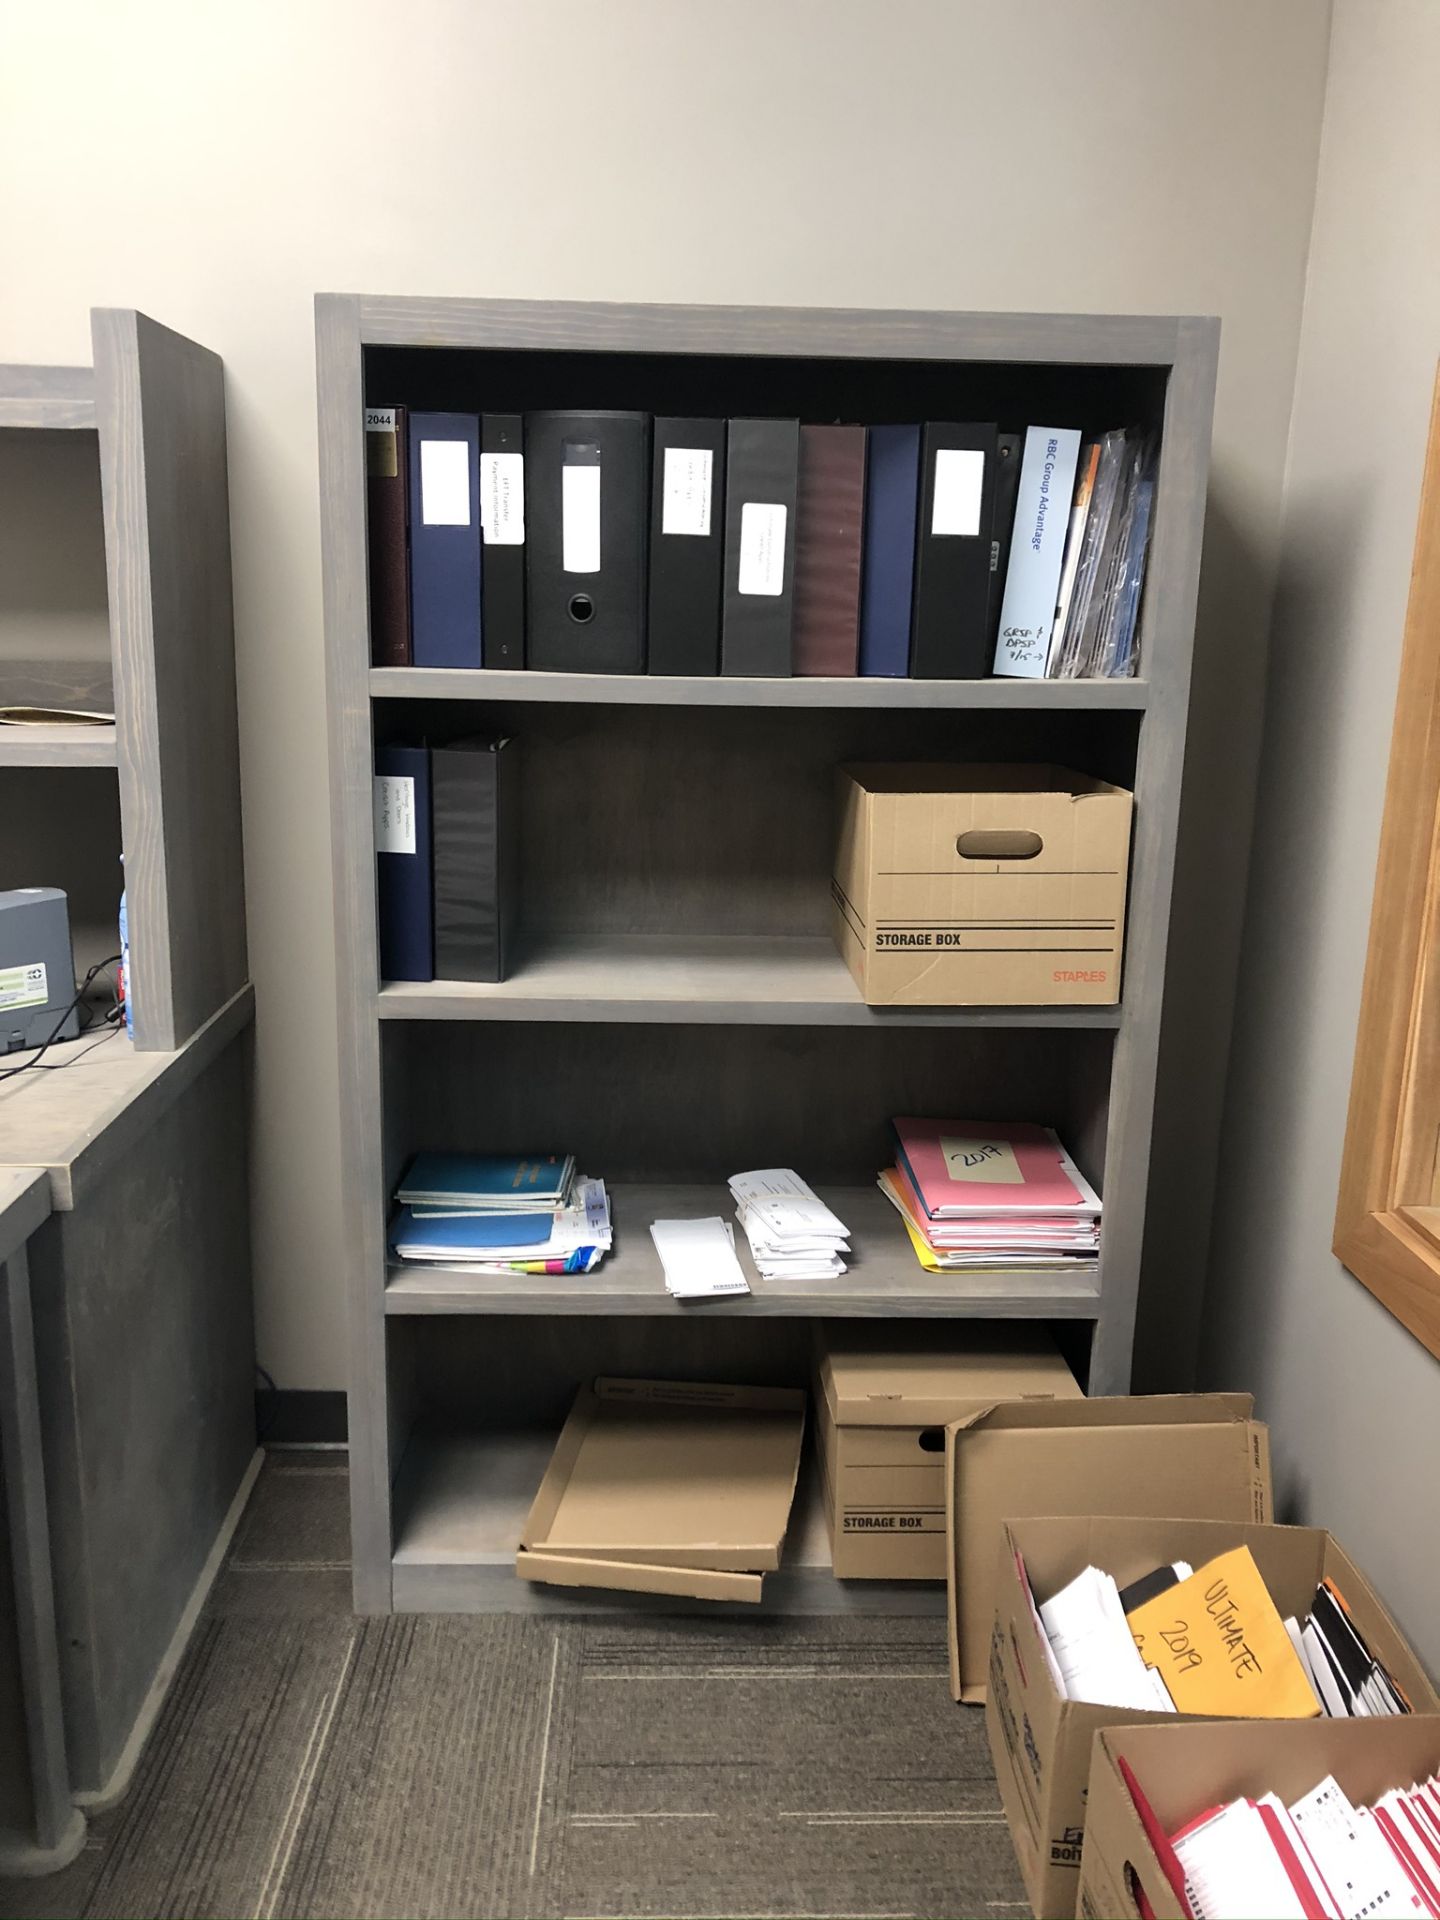 GRAY, L-SHAPED, OFFICE DESK WITH BOOKCASE AND HUTCH (CONTENTS NOT INCLUDED) - Image 2 of 2